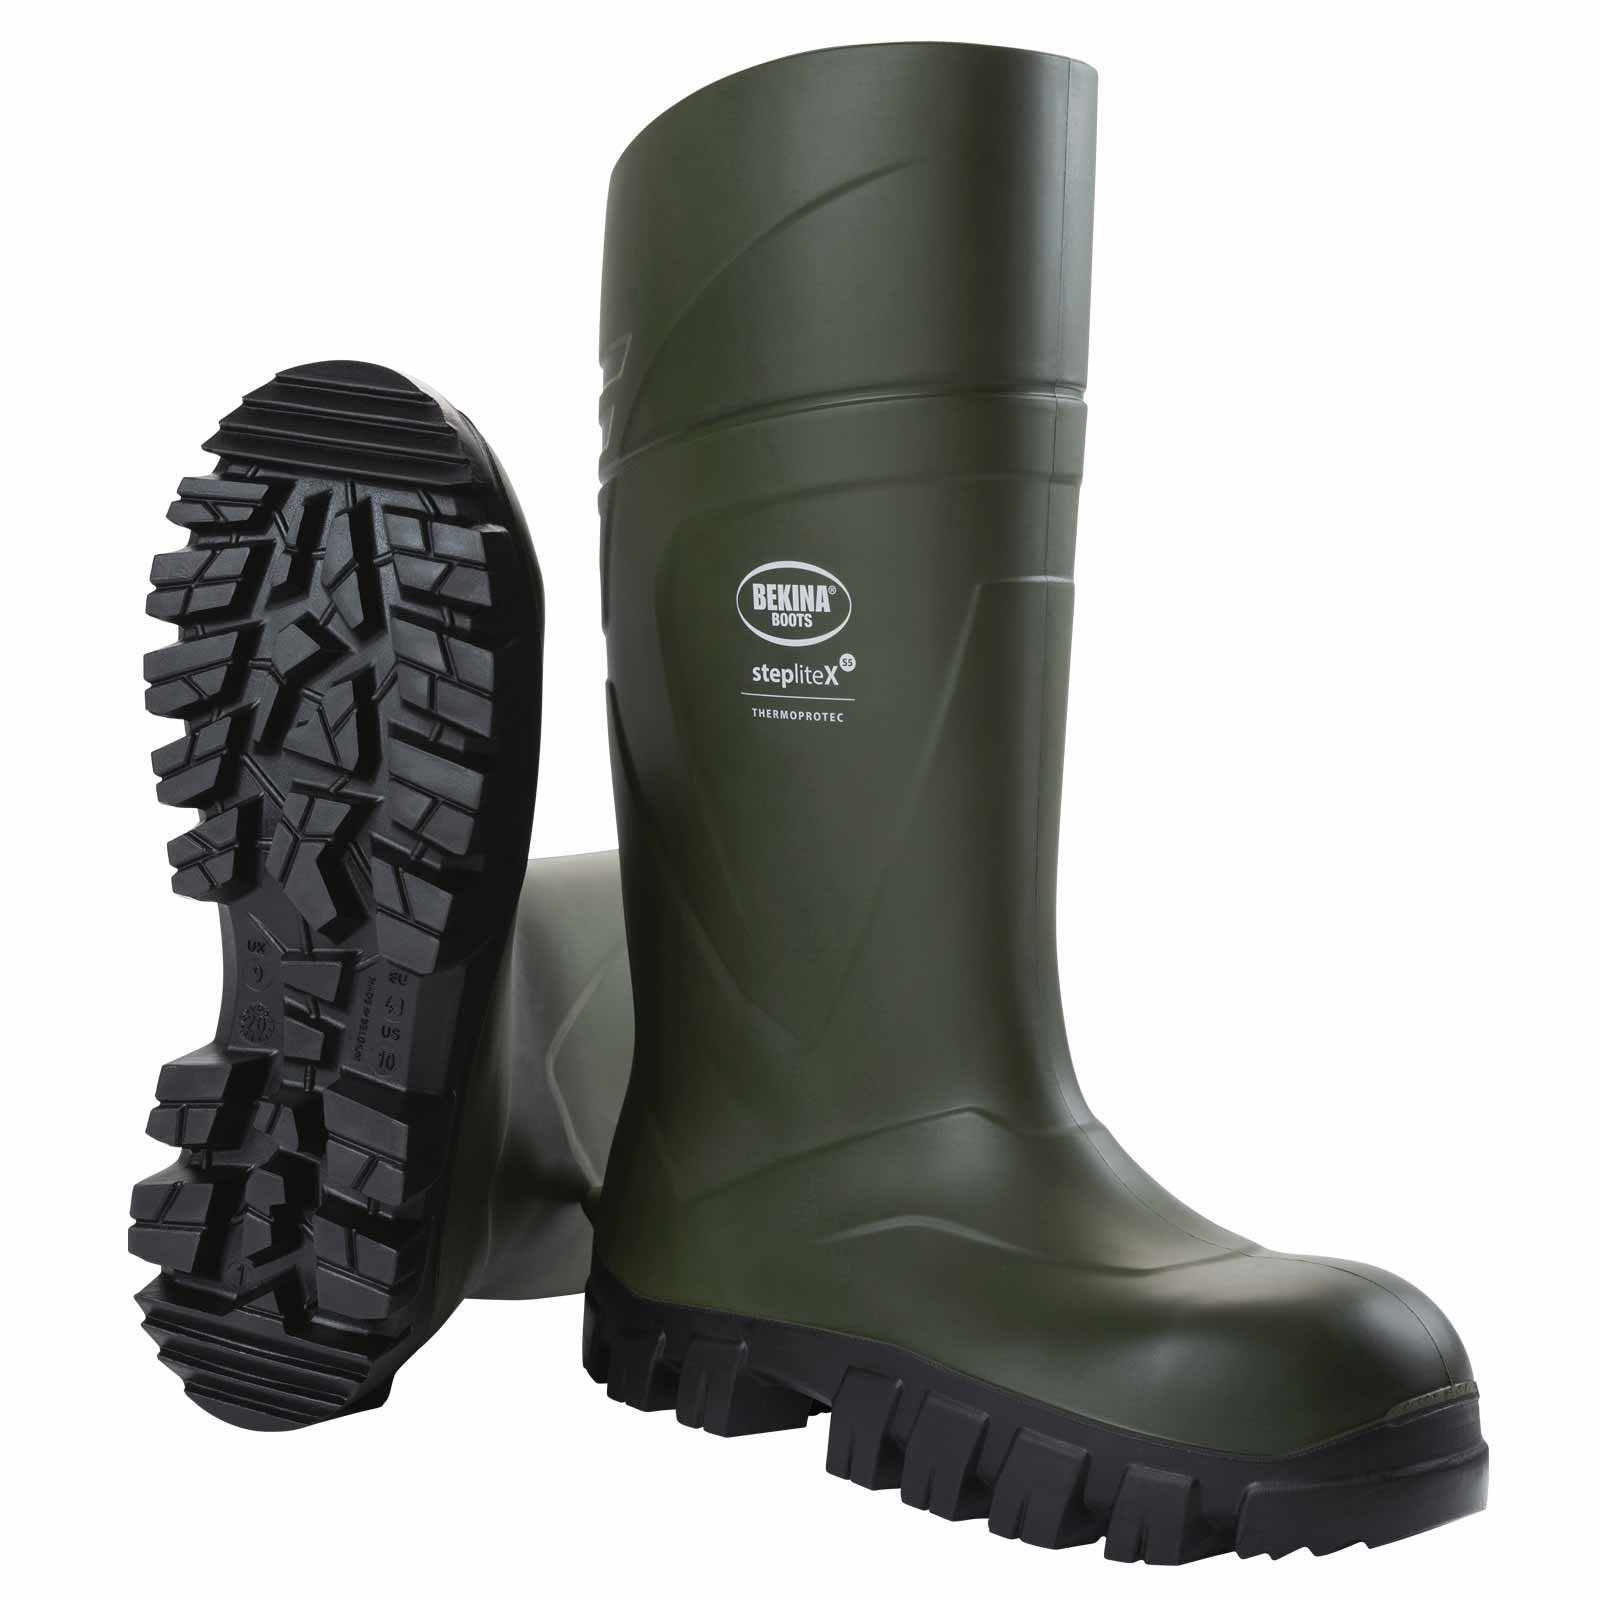 Bekina StepliteX ThermoProtect XCi s5 winter safety boots 37